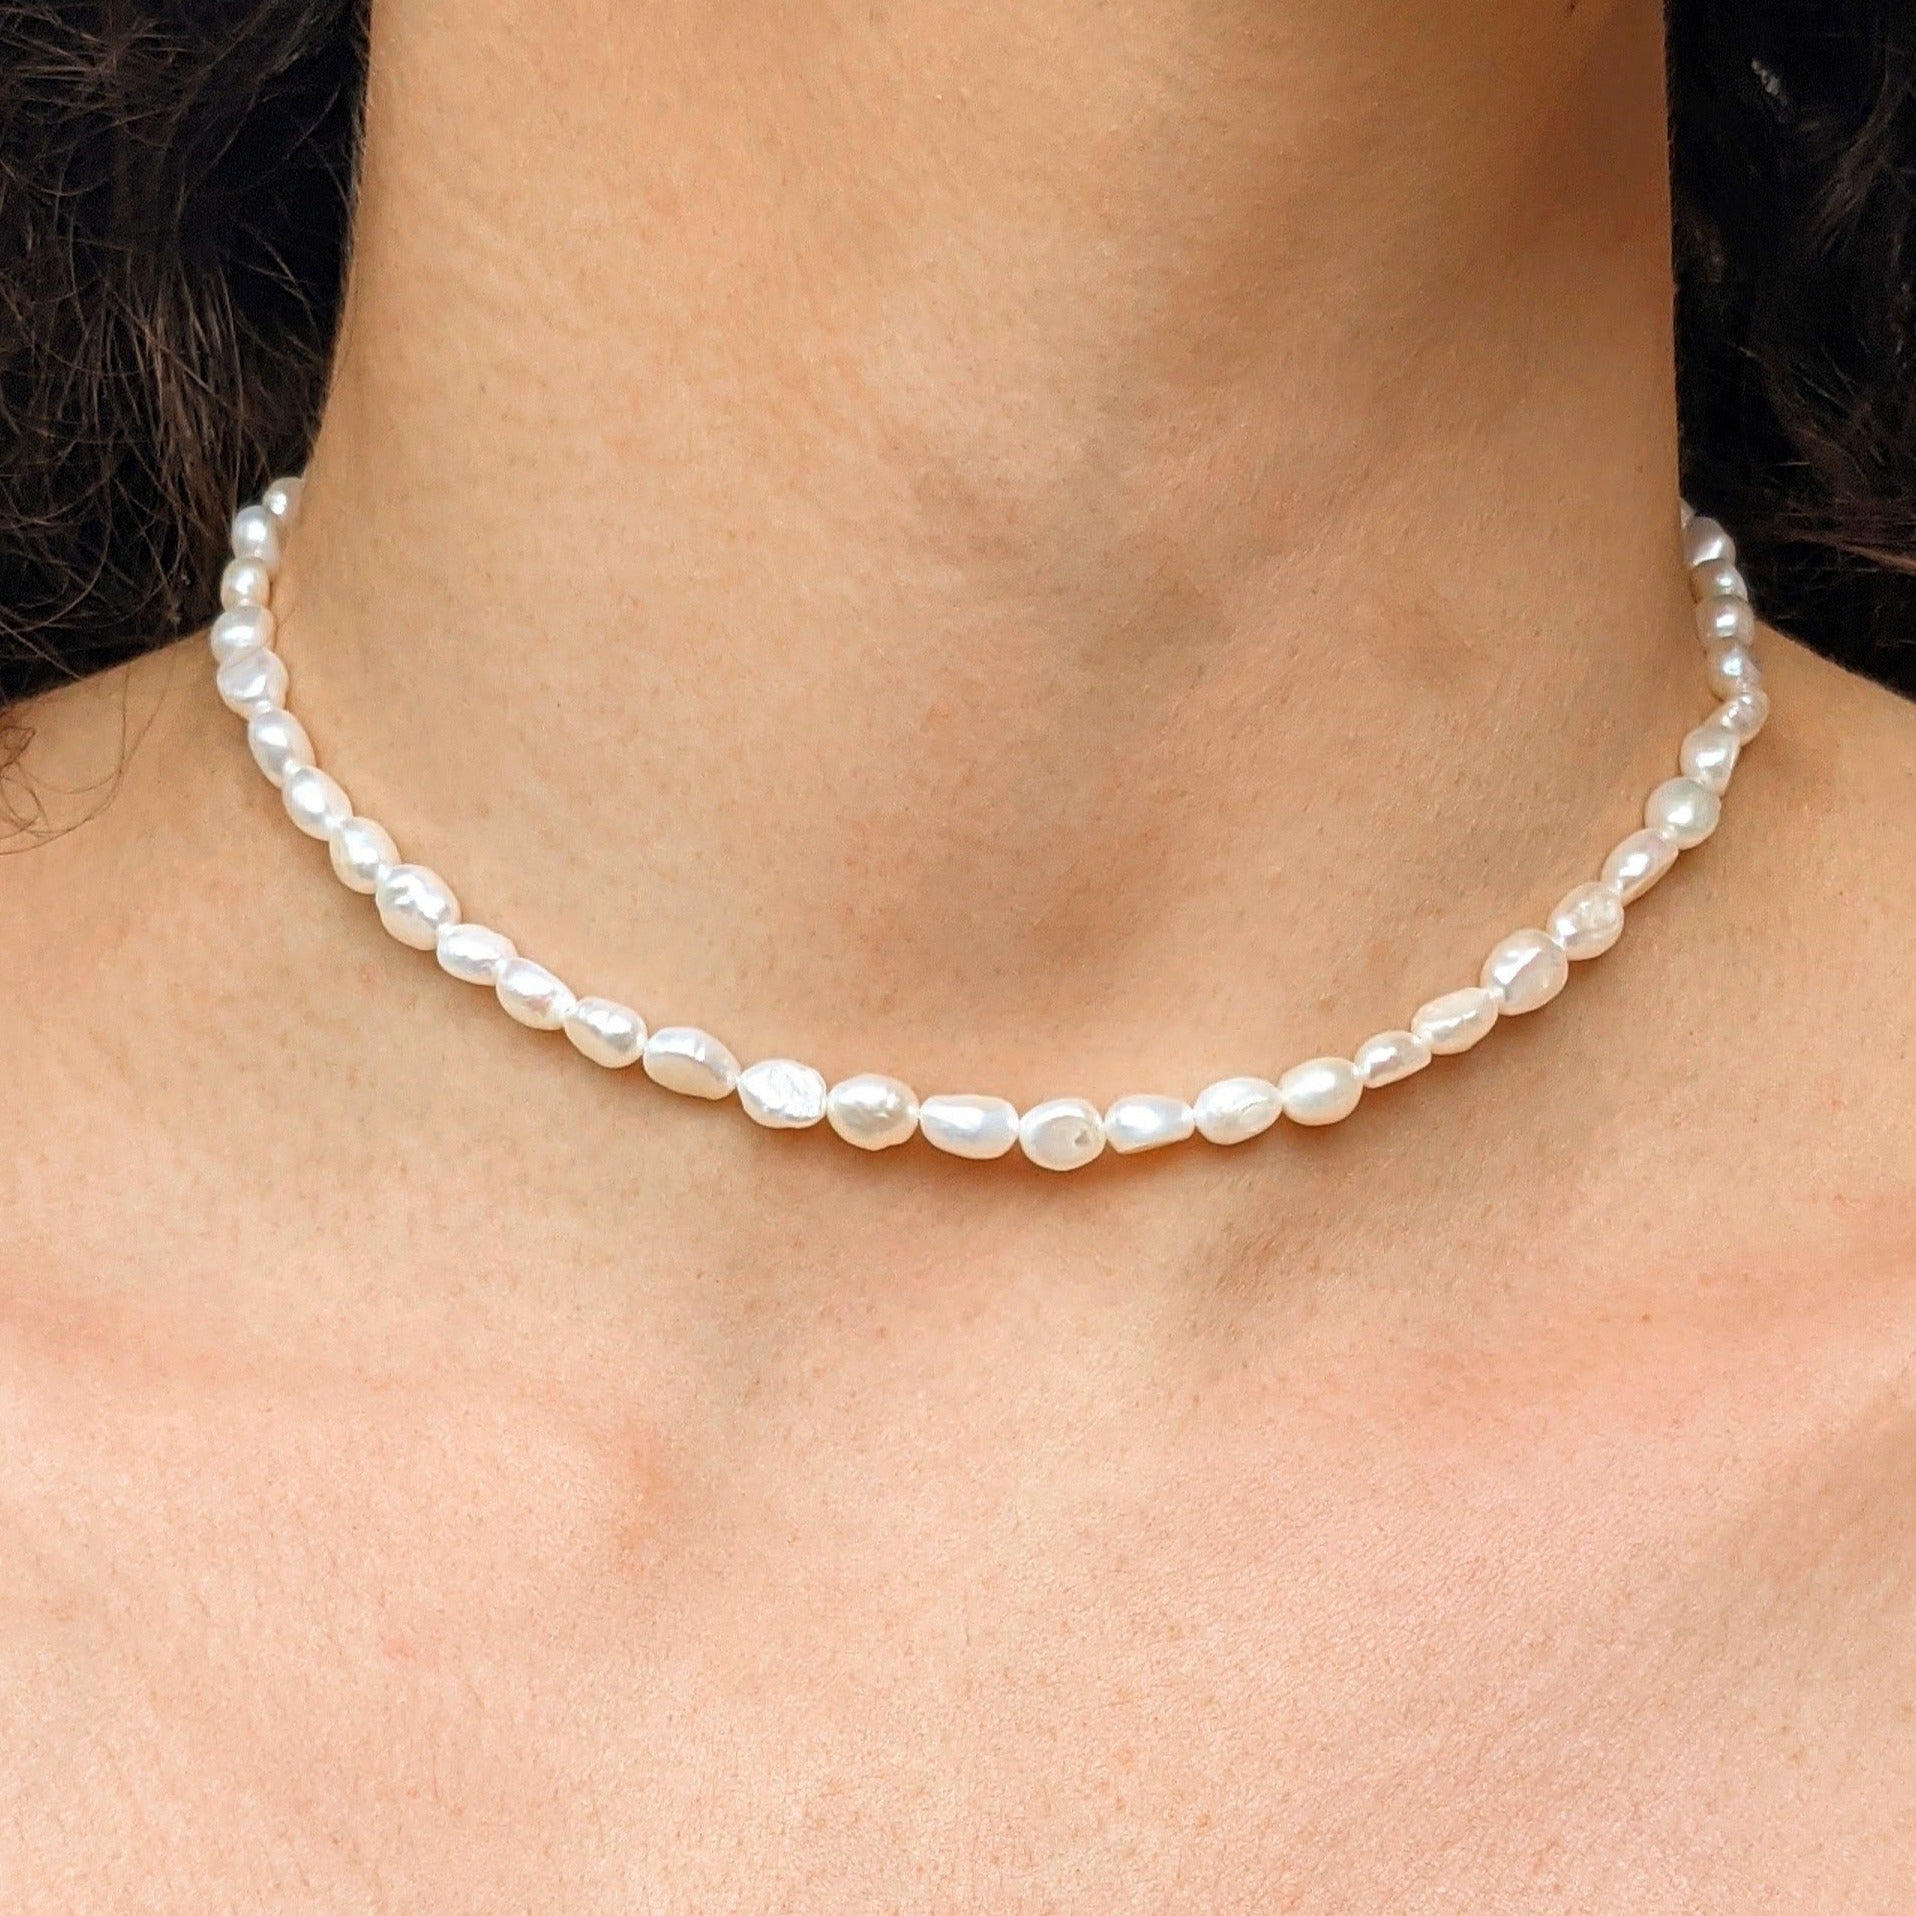 Pearl choker necklace small baroque irregular seed 15 inch length